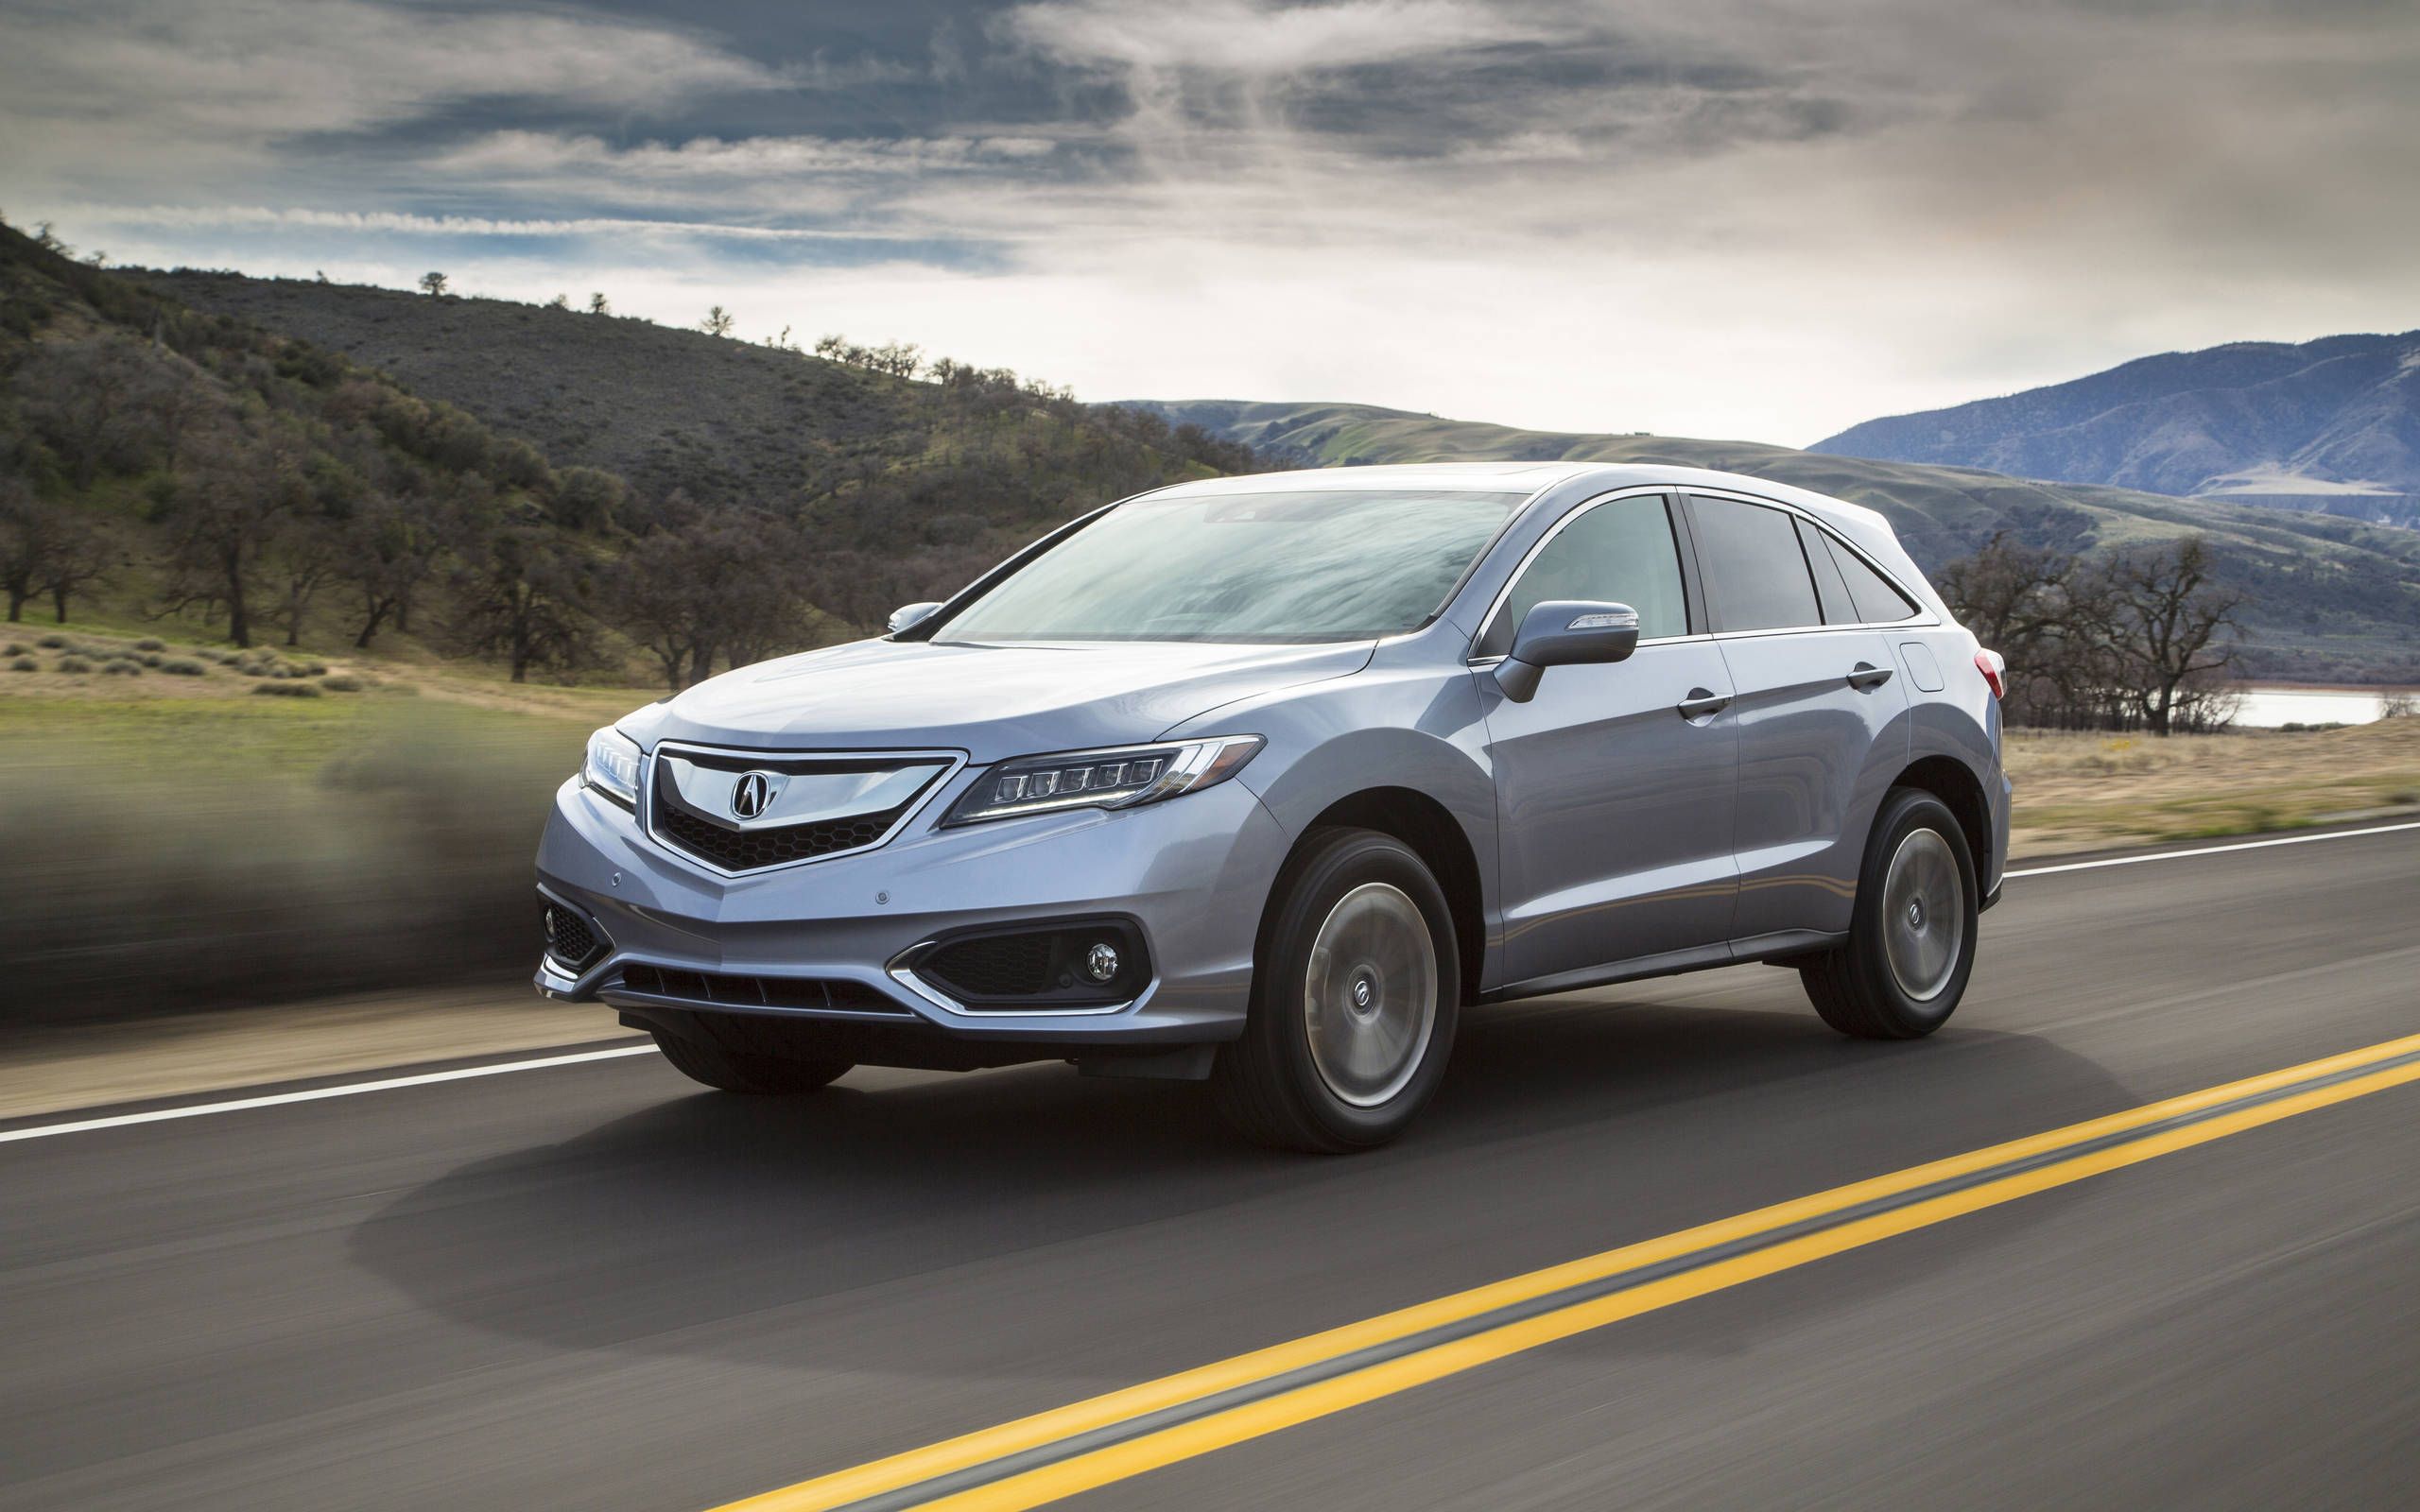 2017 Acura RDX AWD review: Comfortable and handsome, but not quite premium